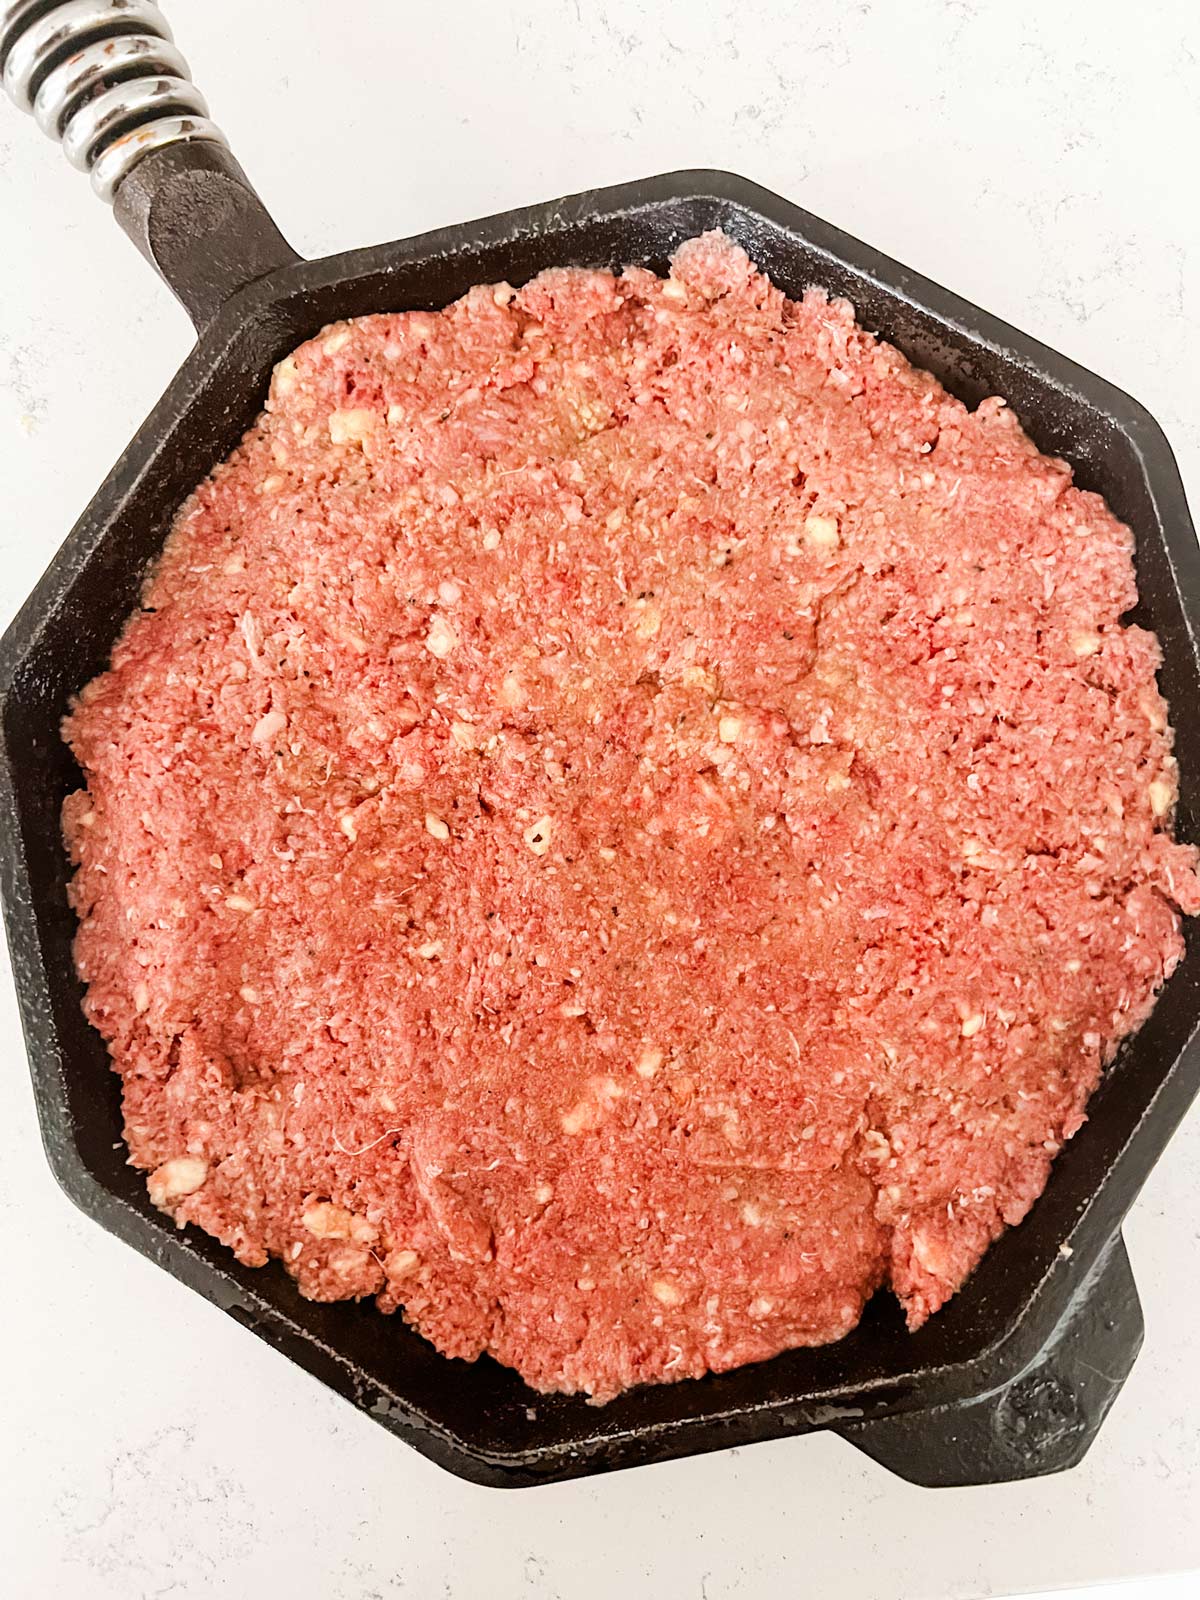 Meatloaf in a cast iron skillet ready for the oven.